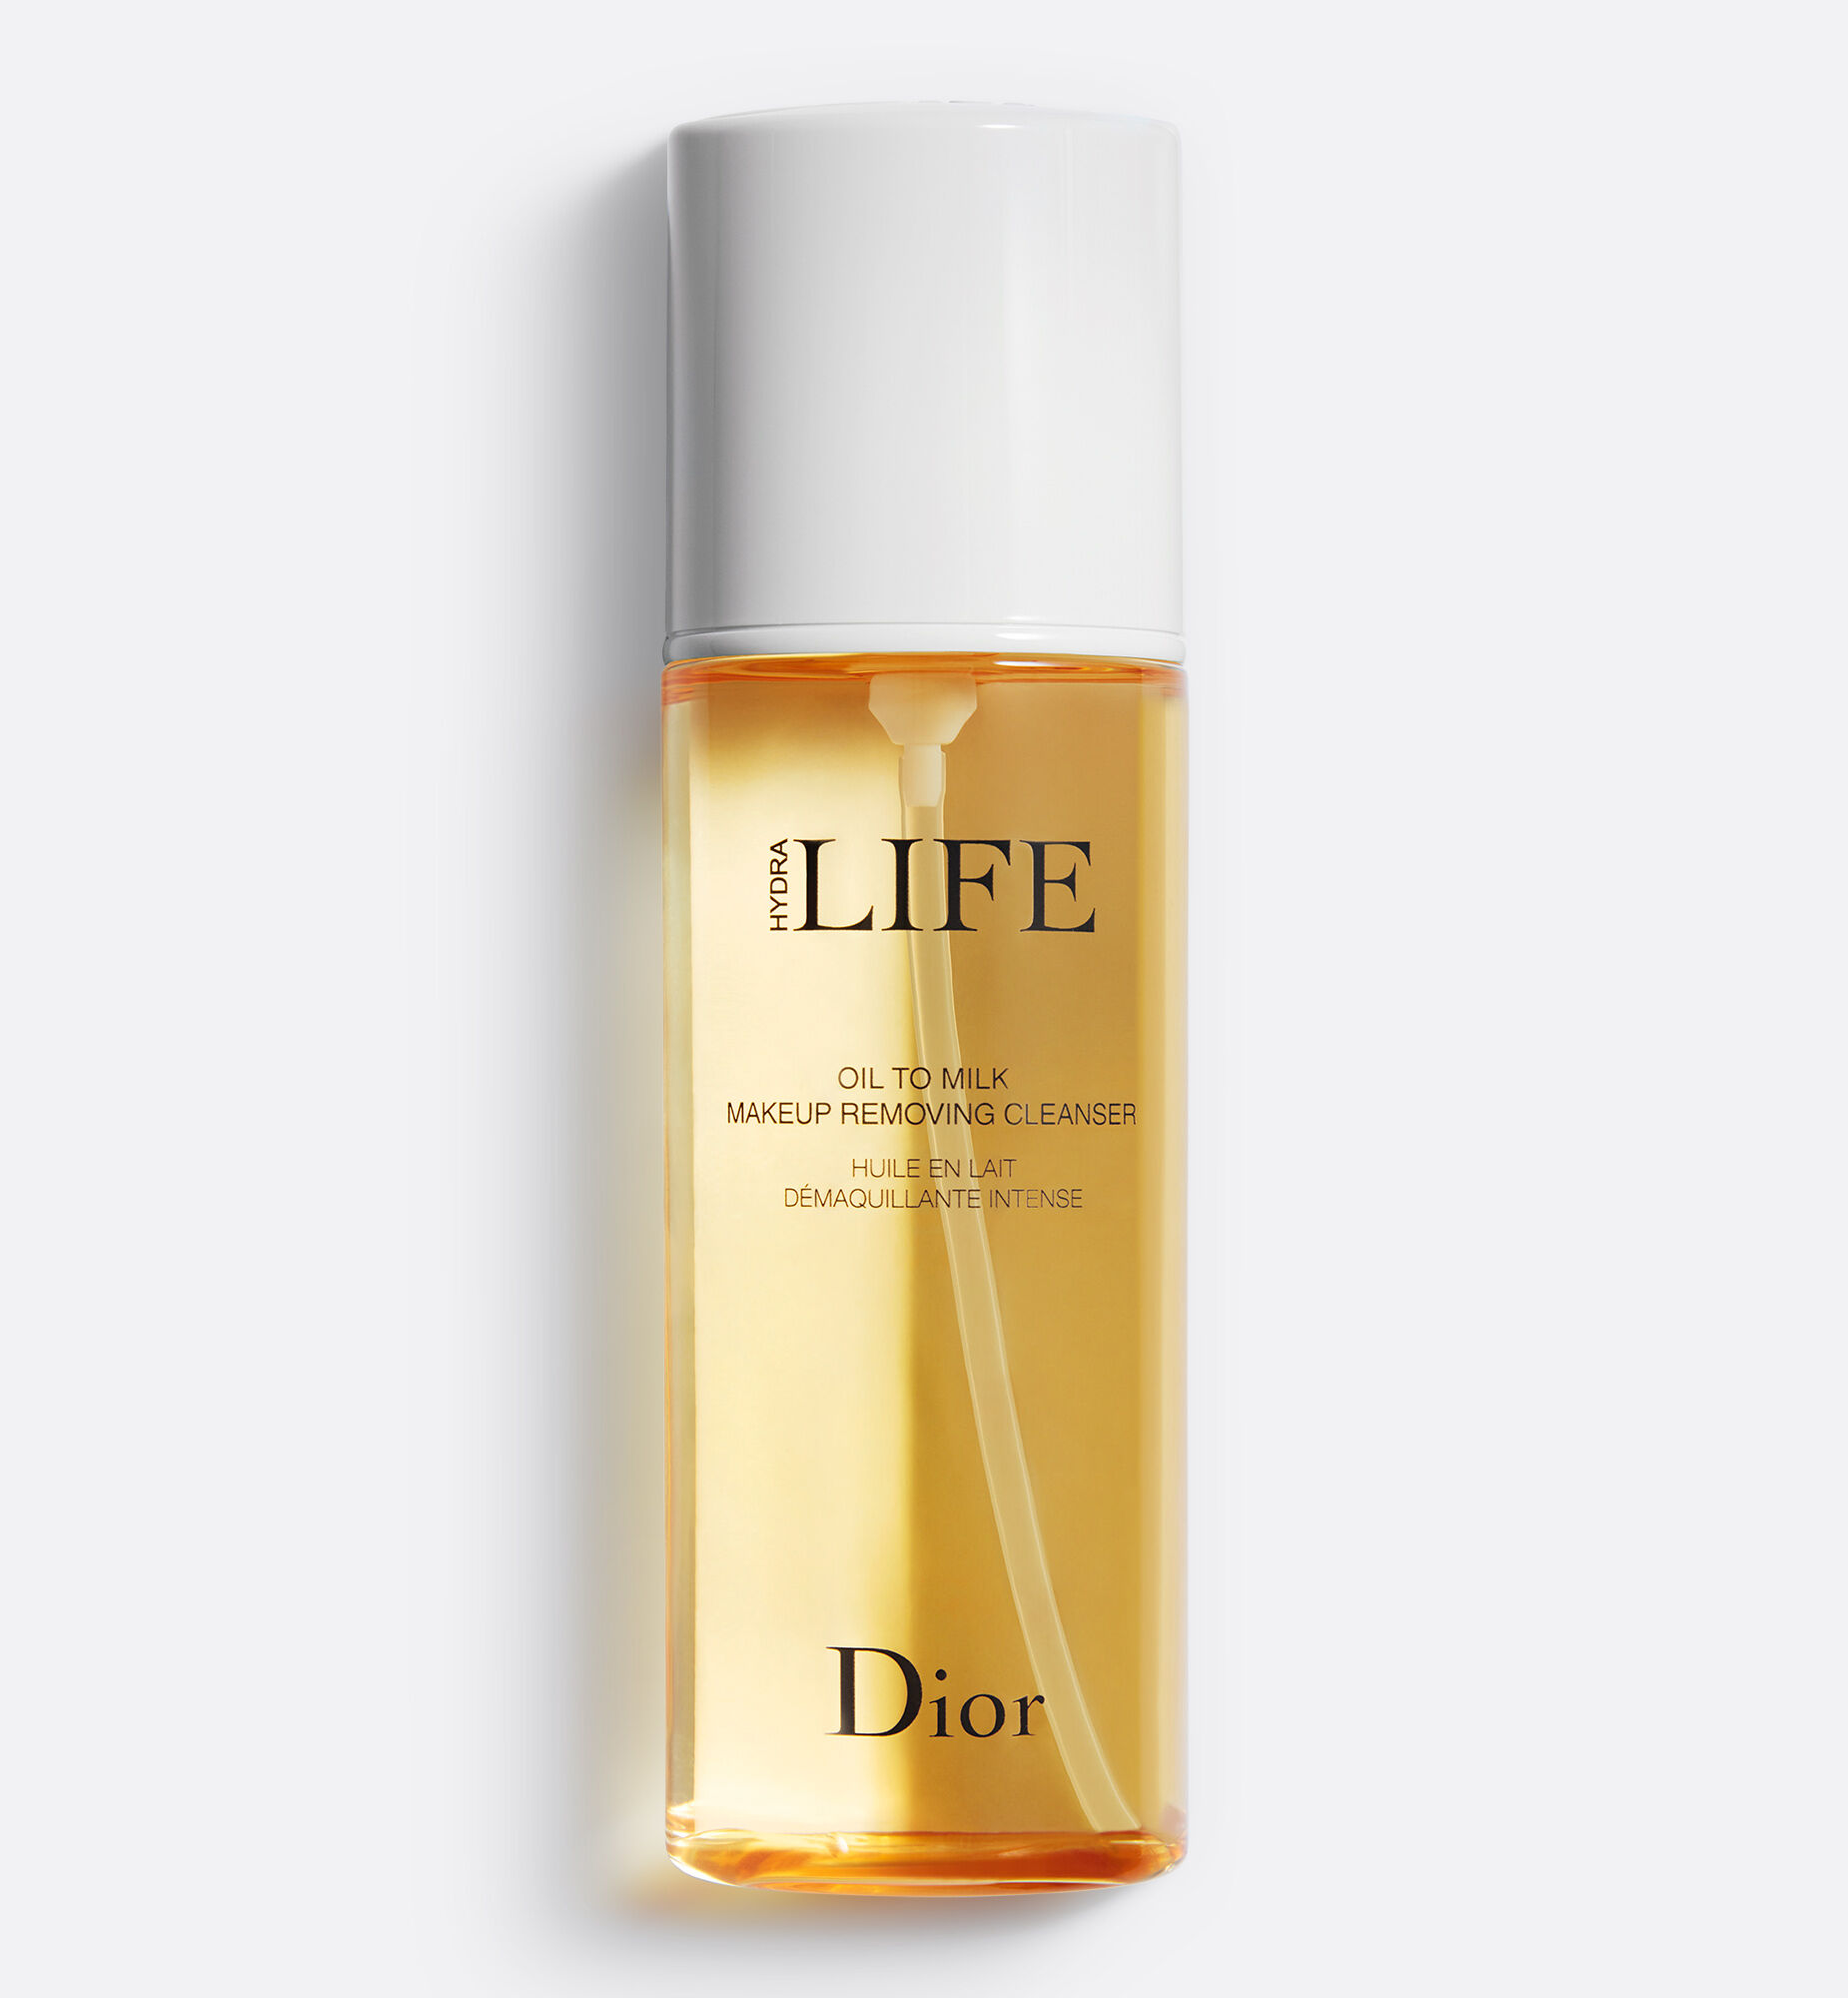 Dior Hydra Life Oil to milk  makeup removing cleanser  The collections   Skincare  DIOR